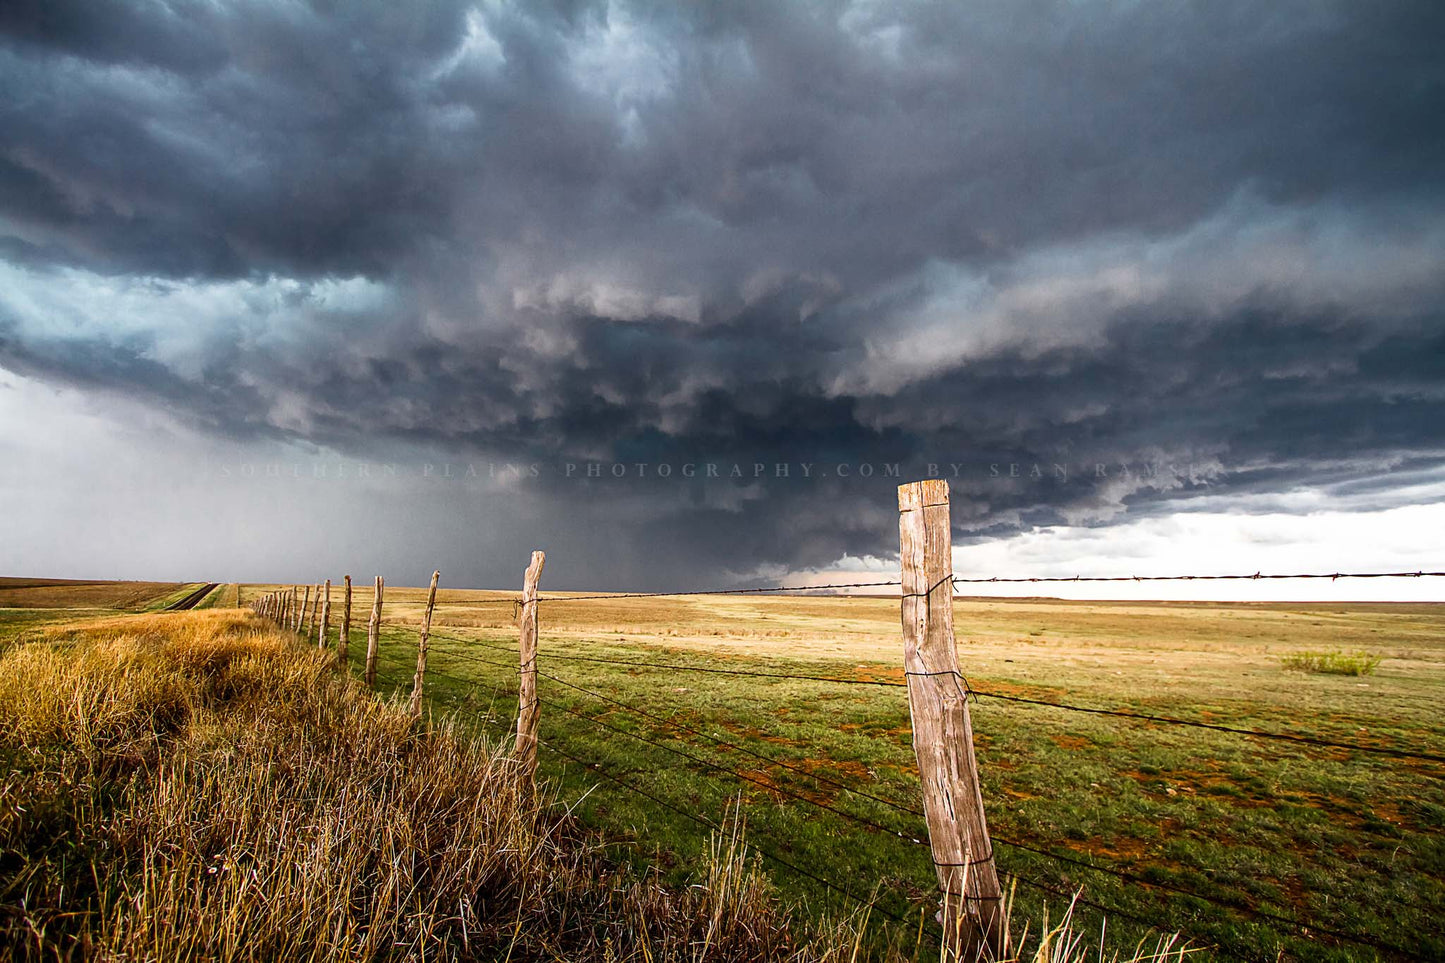 Storm photography print of a powerful thunderstorm with a gentle appearance over a barbed wire fence on a stormy spring day in Texas by Sean Ramsey of Southern Plains Photography.